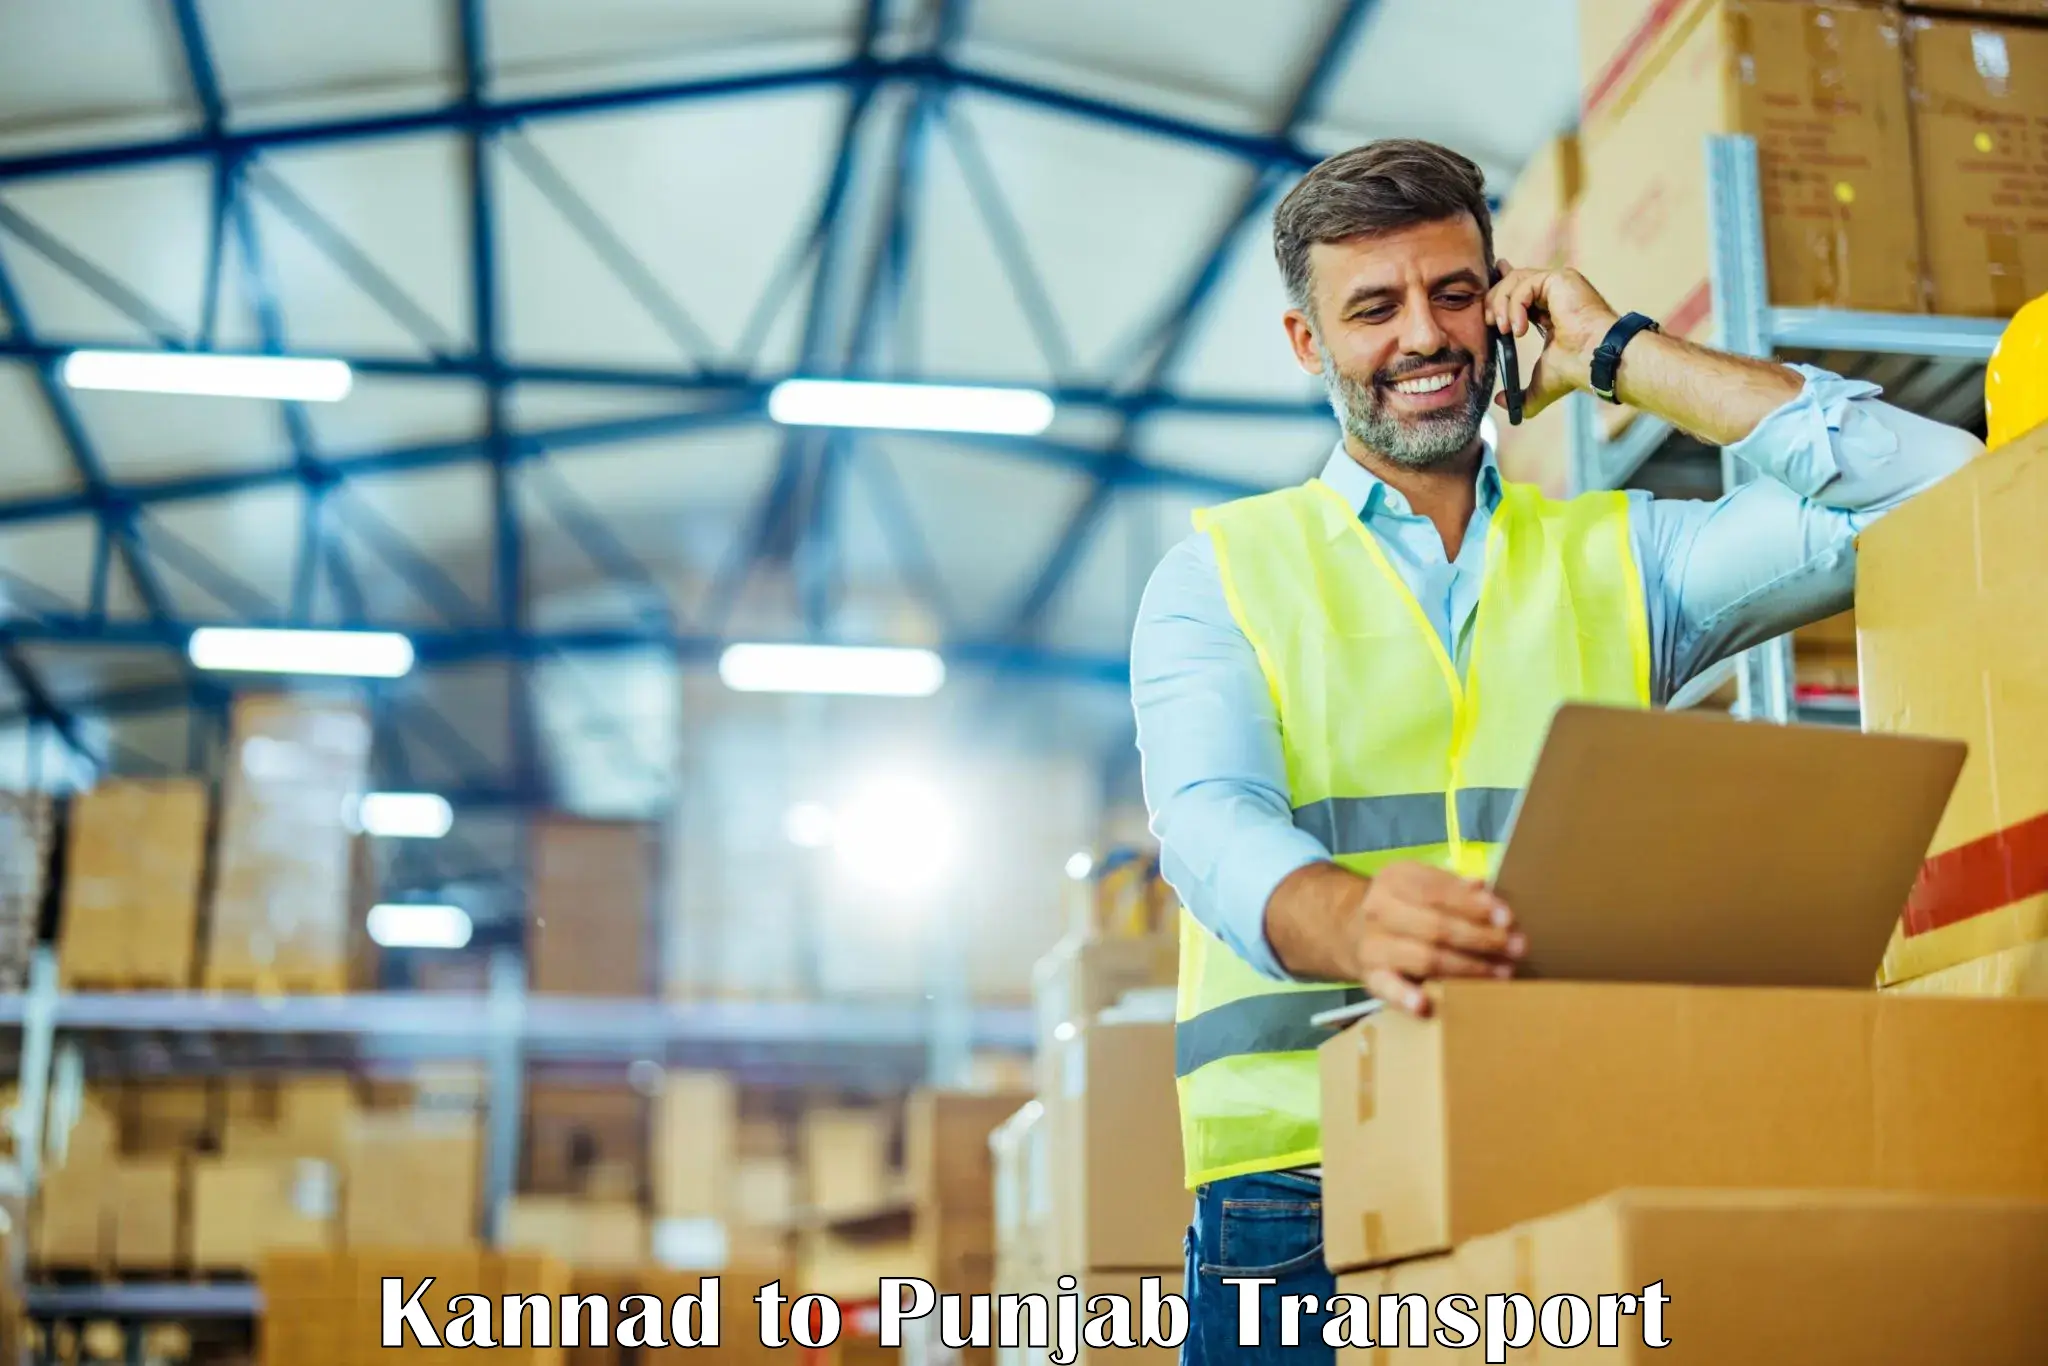 Delivery service in Kannad to Fatehgarh Sahib